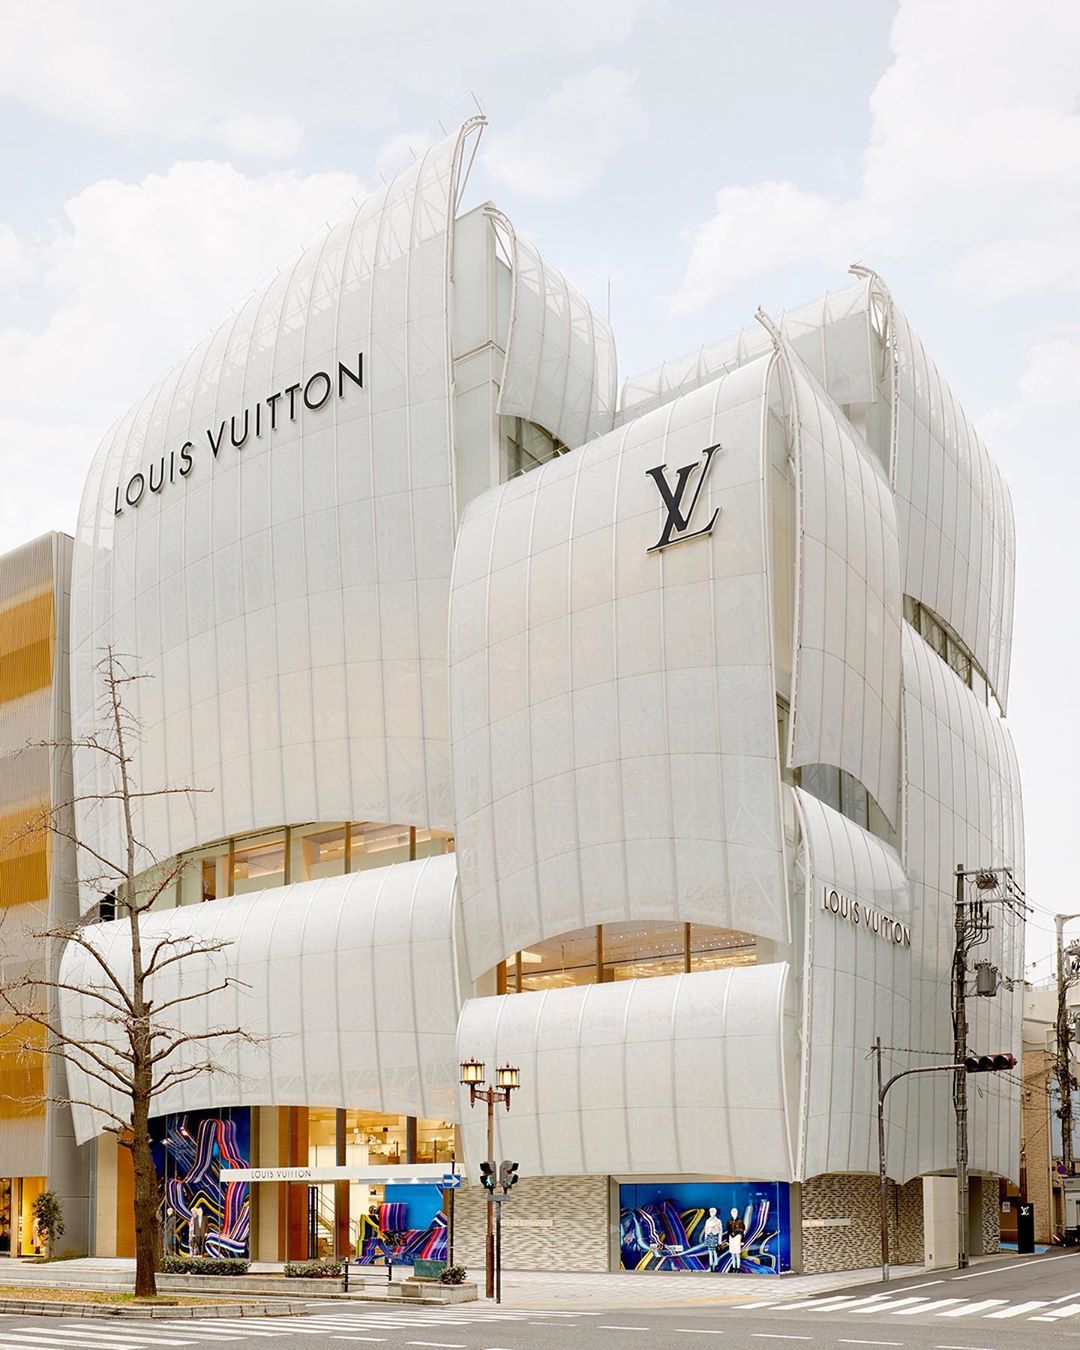 How much I spent at the Louis Vuitton cafe in Tokyo 😱💸💗✨ #louisvuit